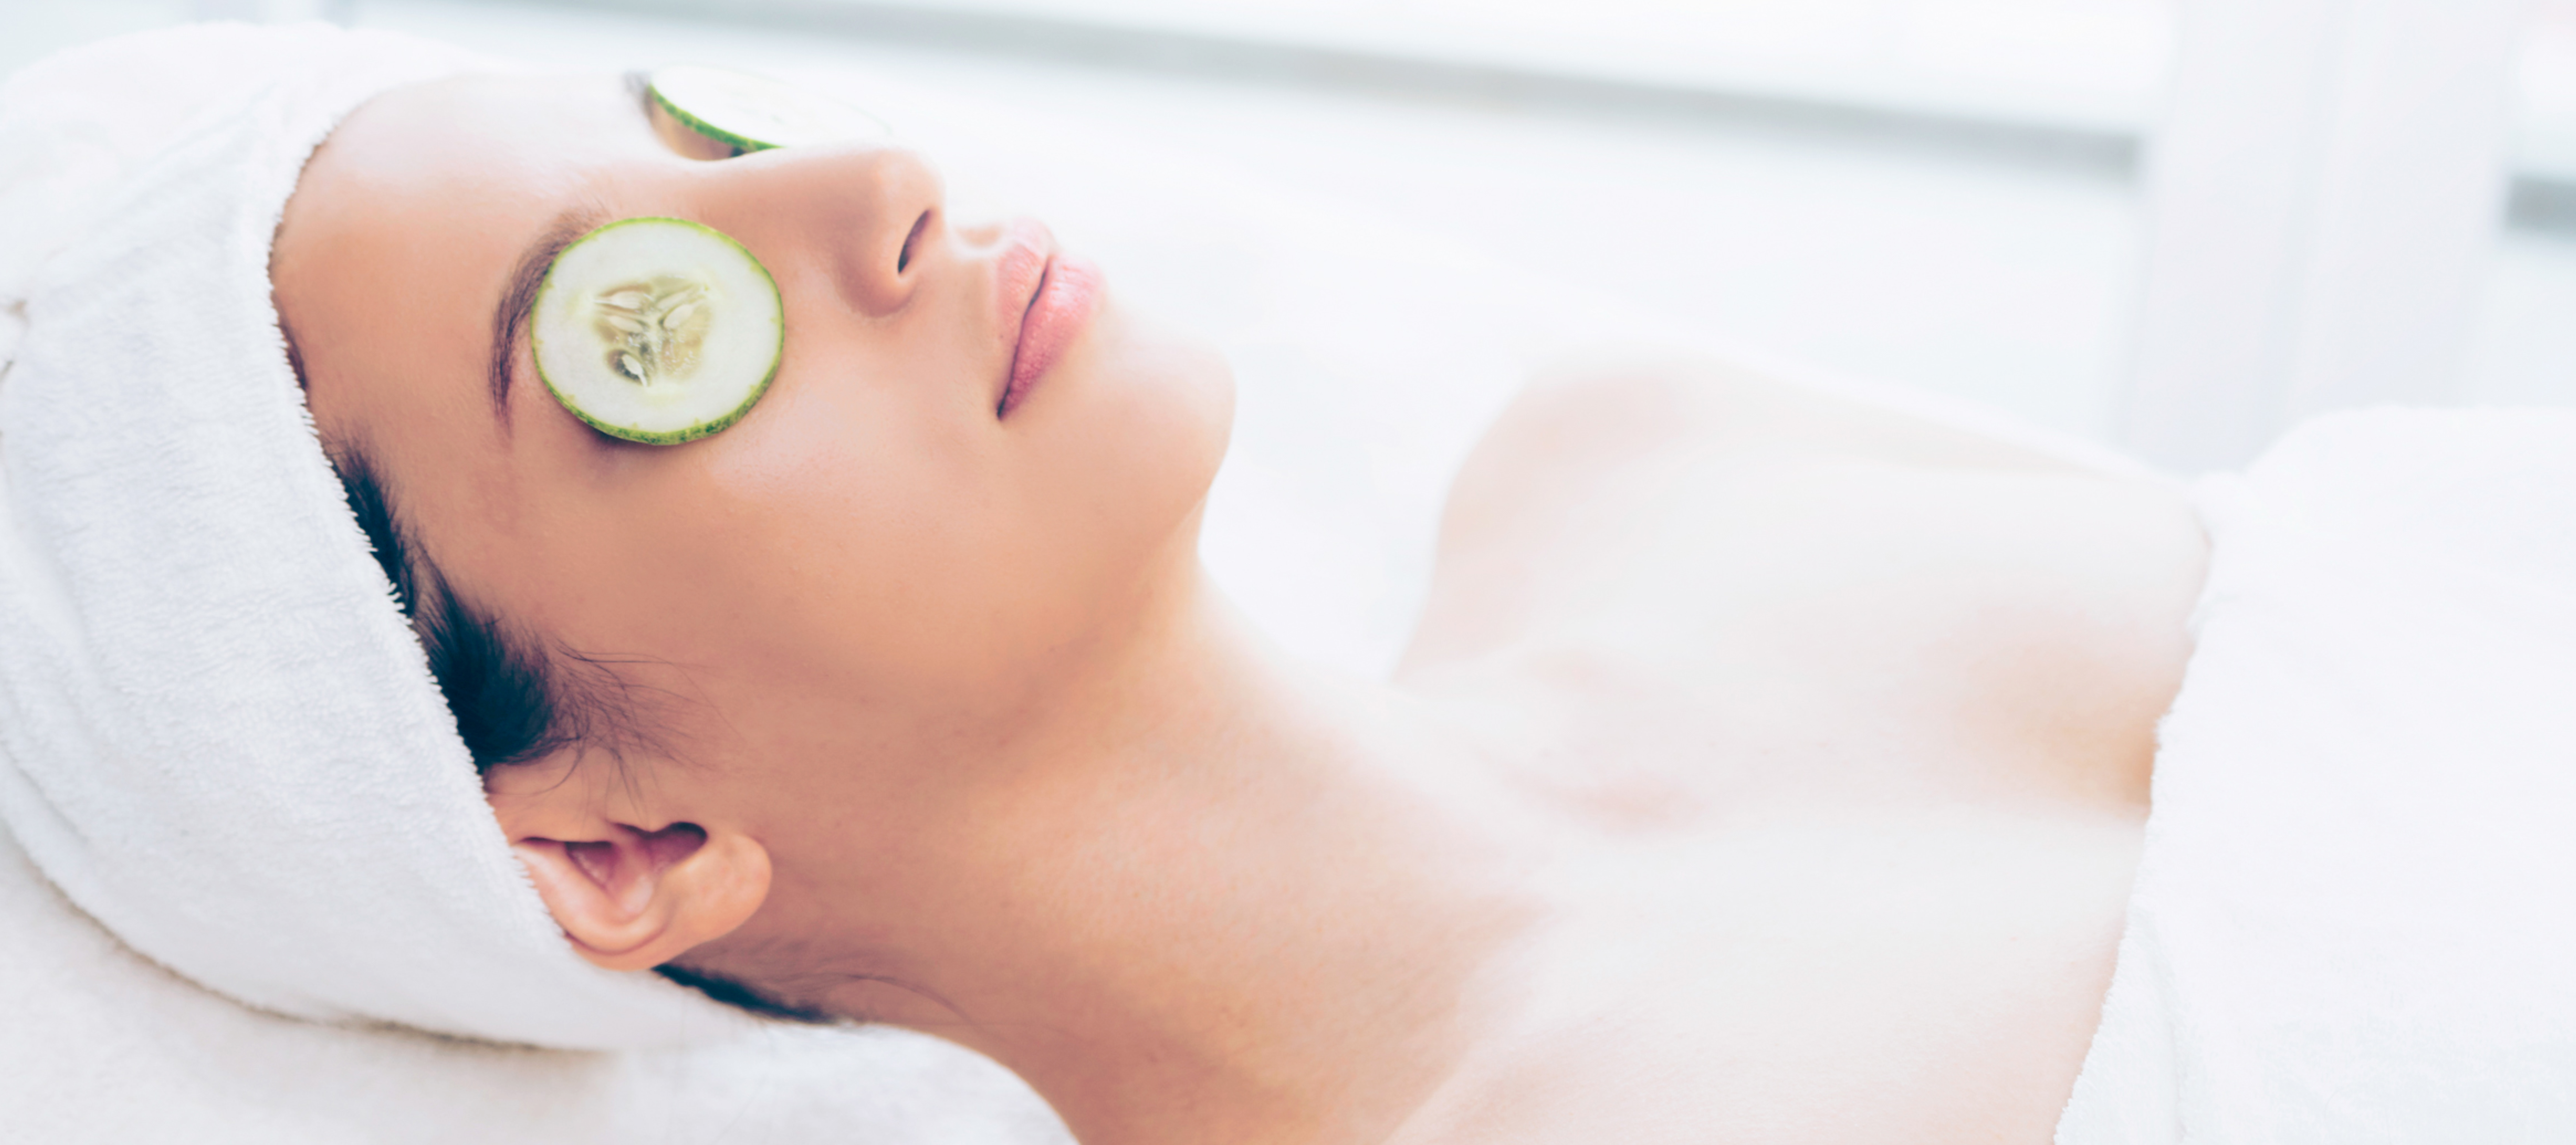 A woman relaxing with cucumbers over her eyes as she is about to receive a facial massage.